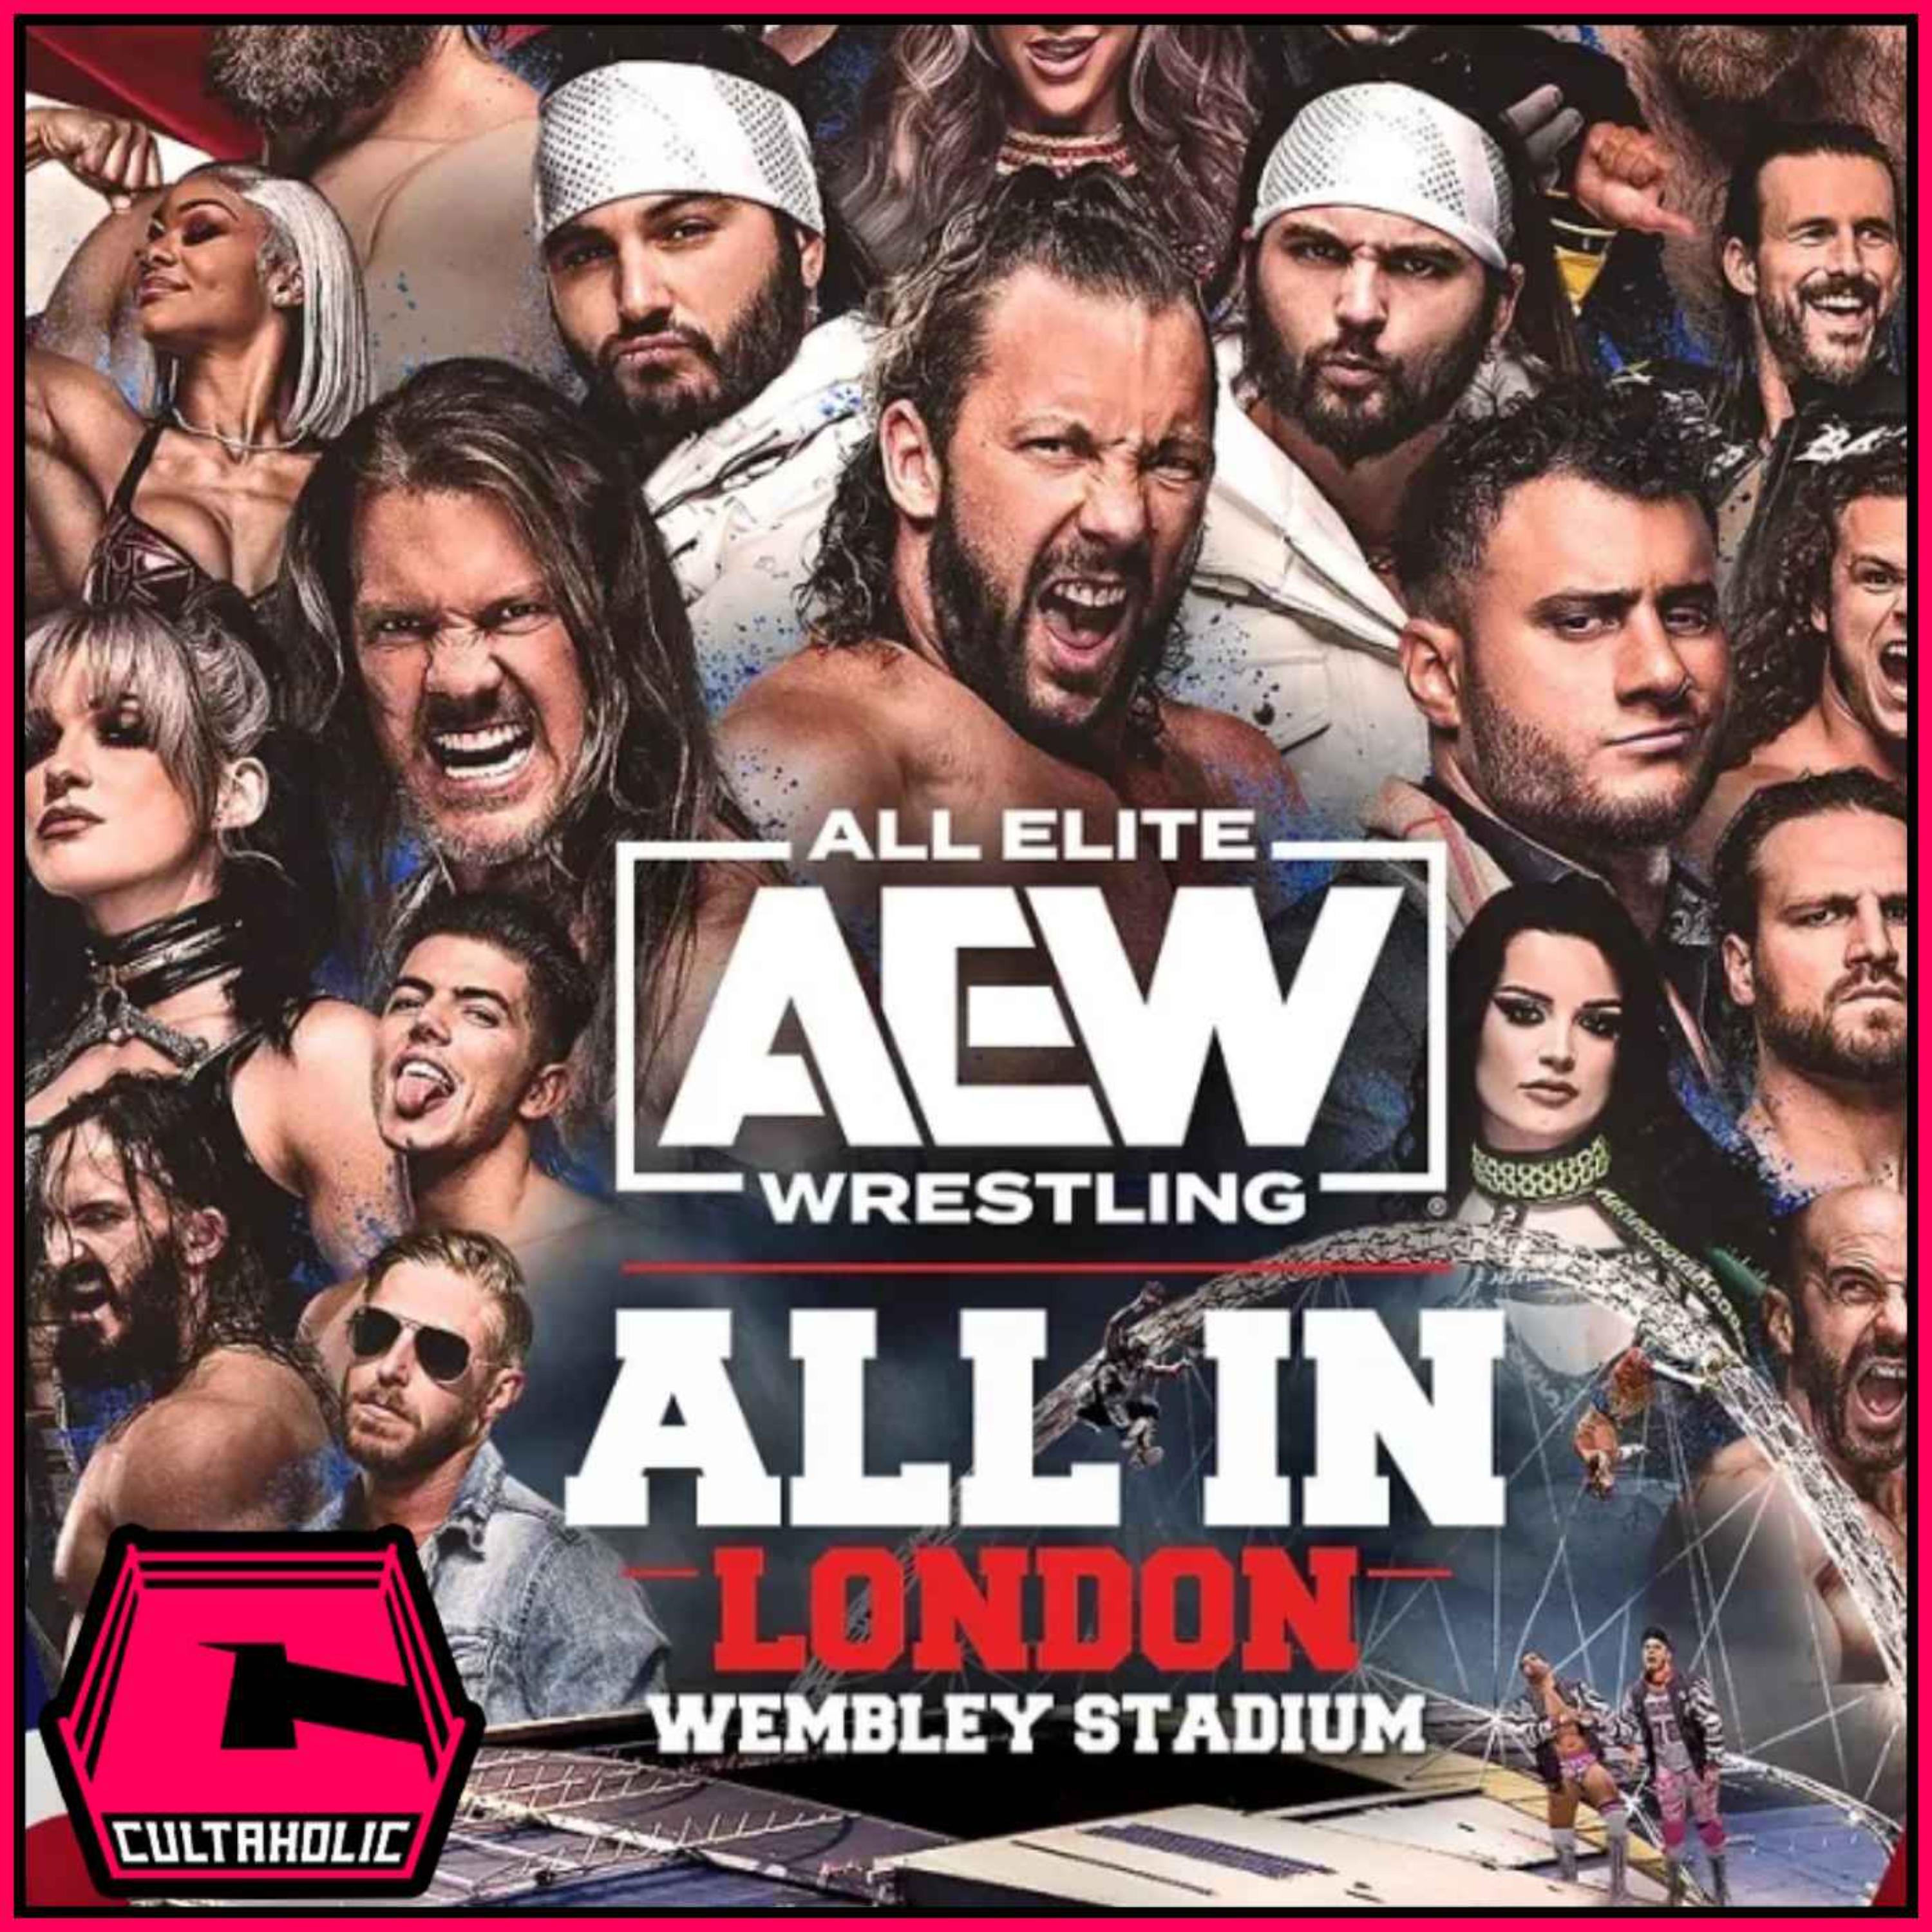 NEWS: AEW Announce WEMBLEY STADIUM Event, Major Title Change, Debut And Return On Dynamite